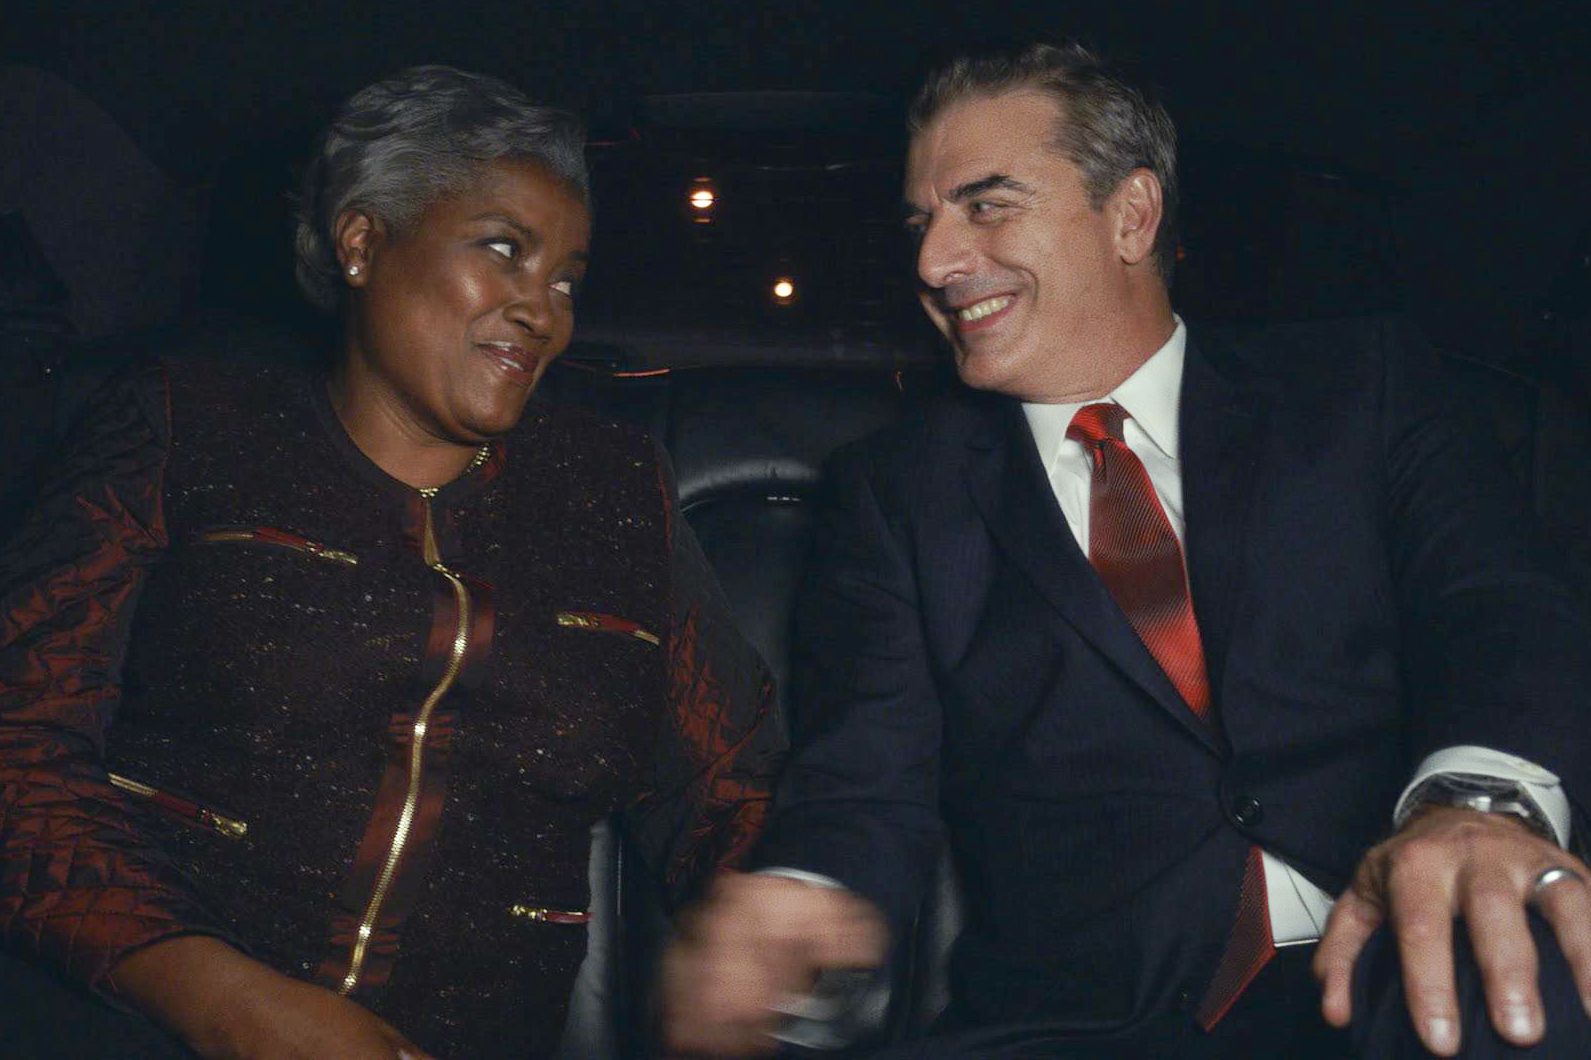 Political Strategist Donna Brazile and Chris Noth on The Good Wife, 2013.